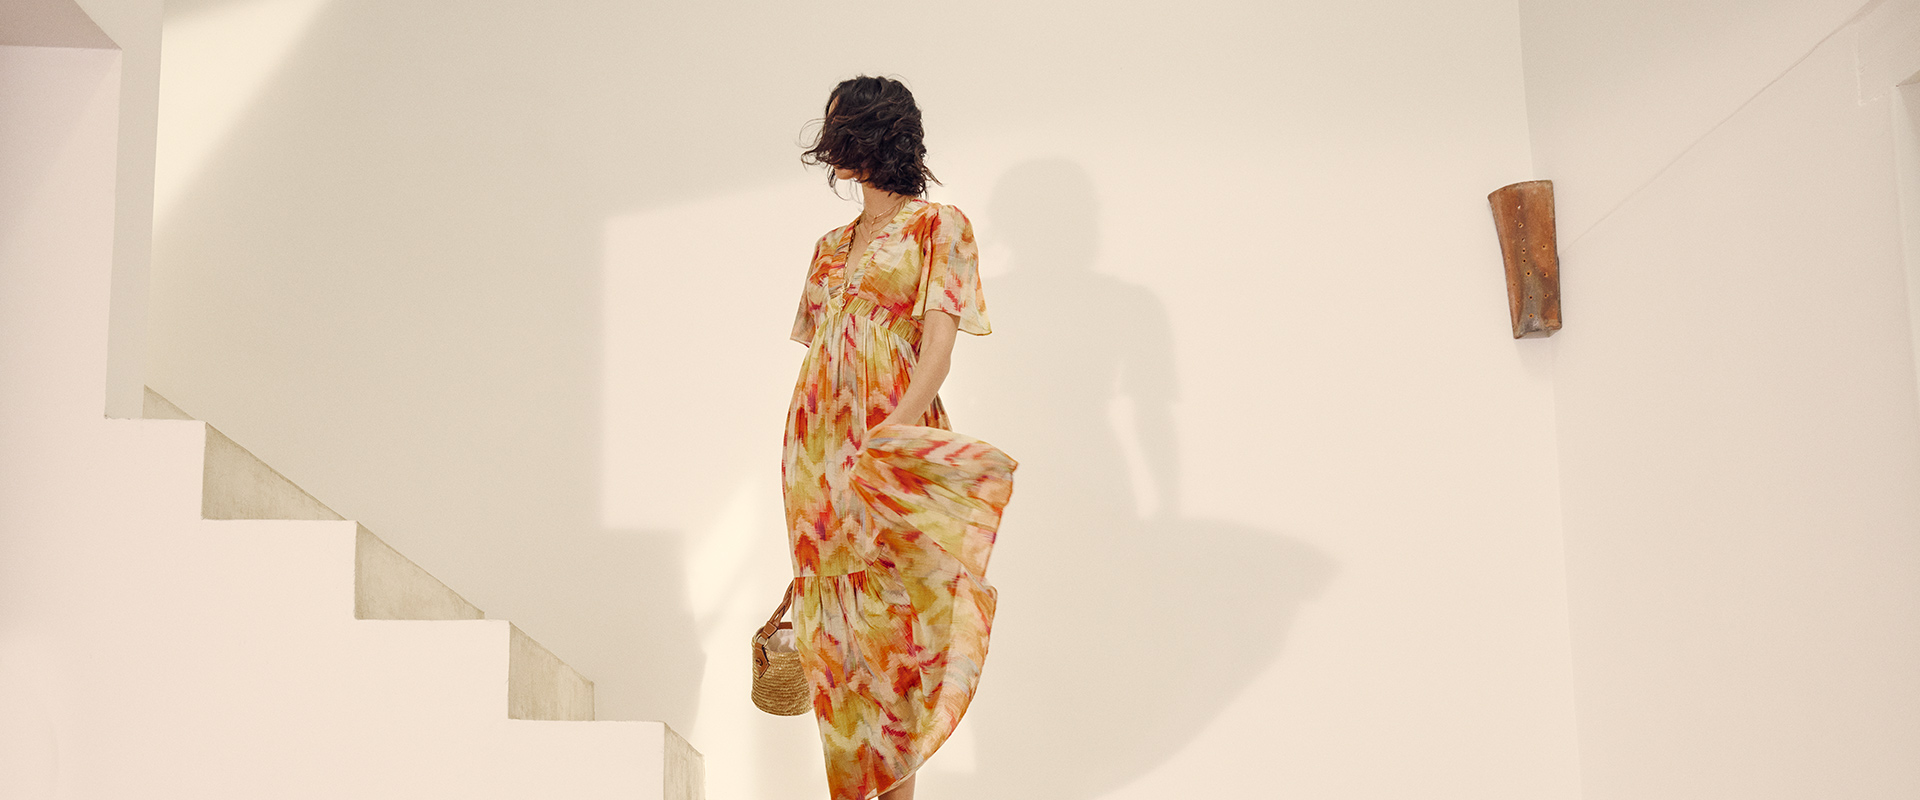 ba&sh new collection SS23, desert the city, discover printed dresses, colourful accessories, leather boots, handbags